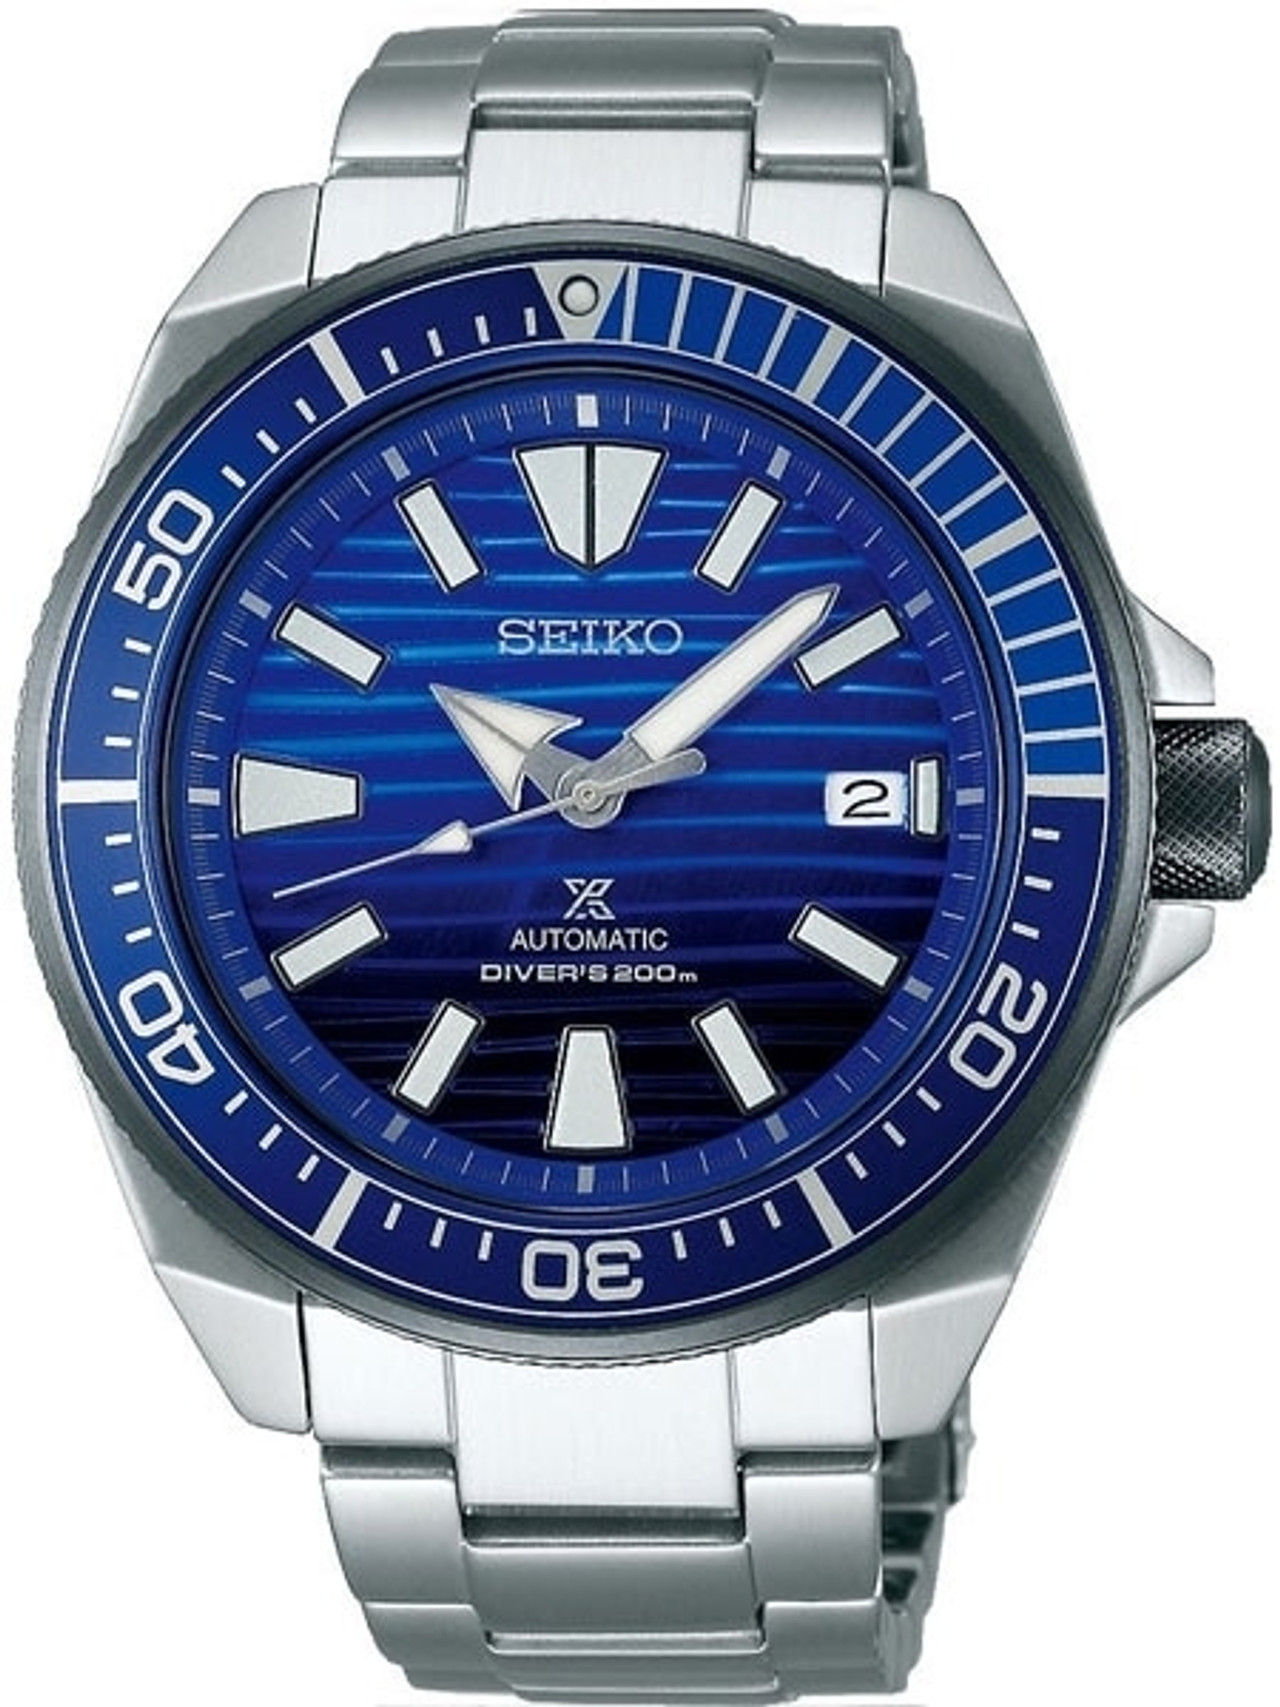 Seiko Samurai Prospex Automatic Dive Watch with Blue Dial and Stainless ...